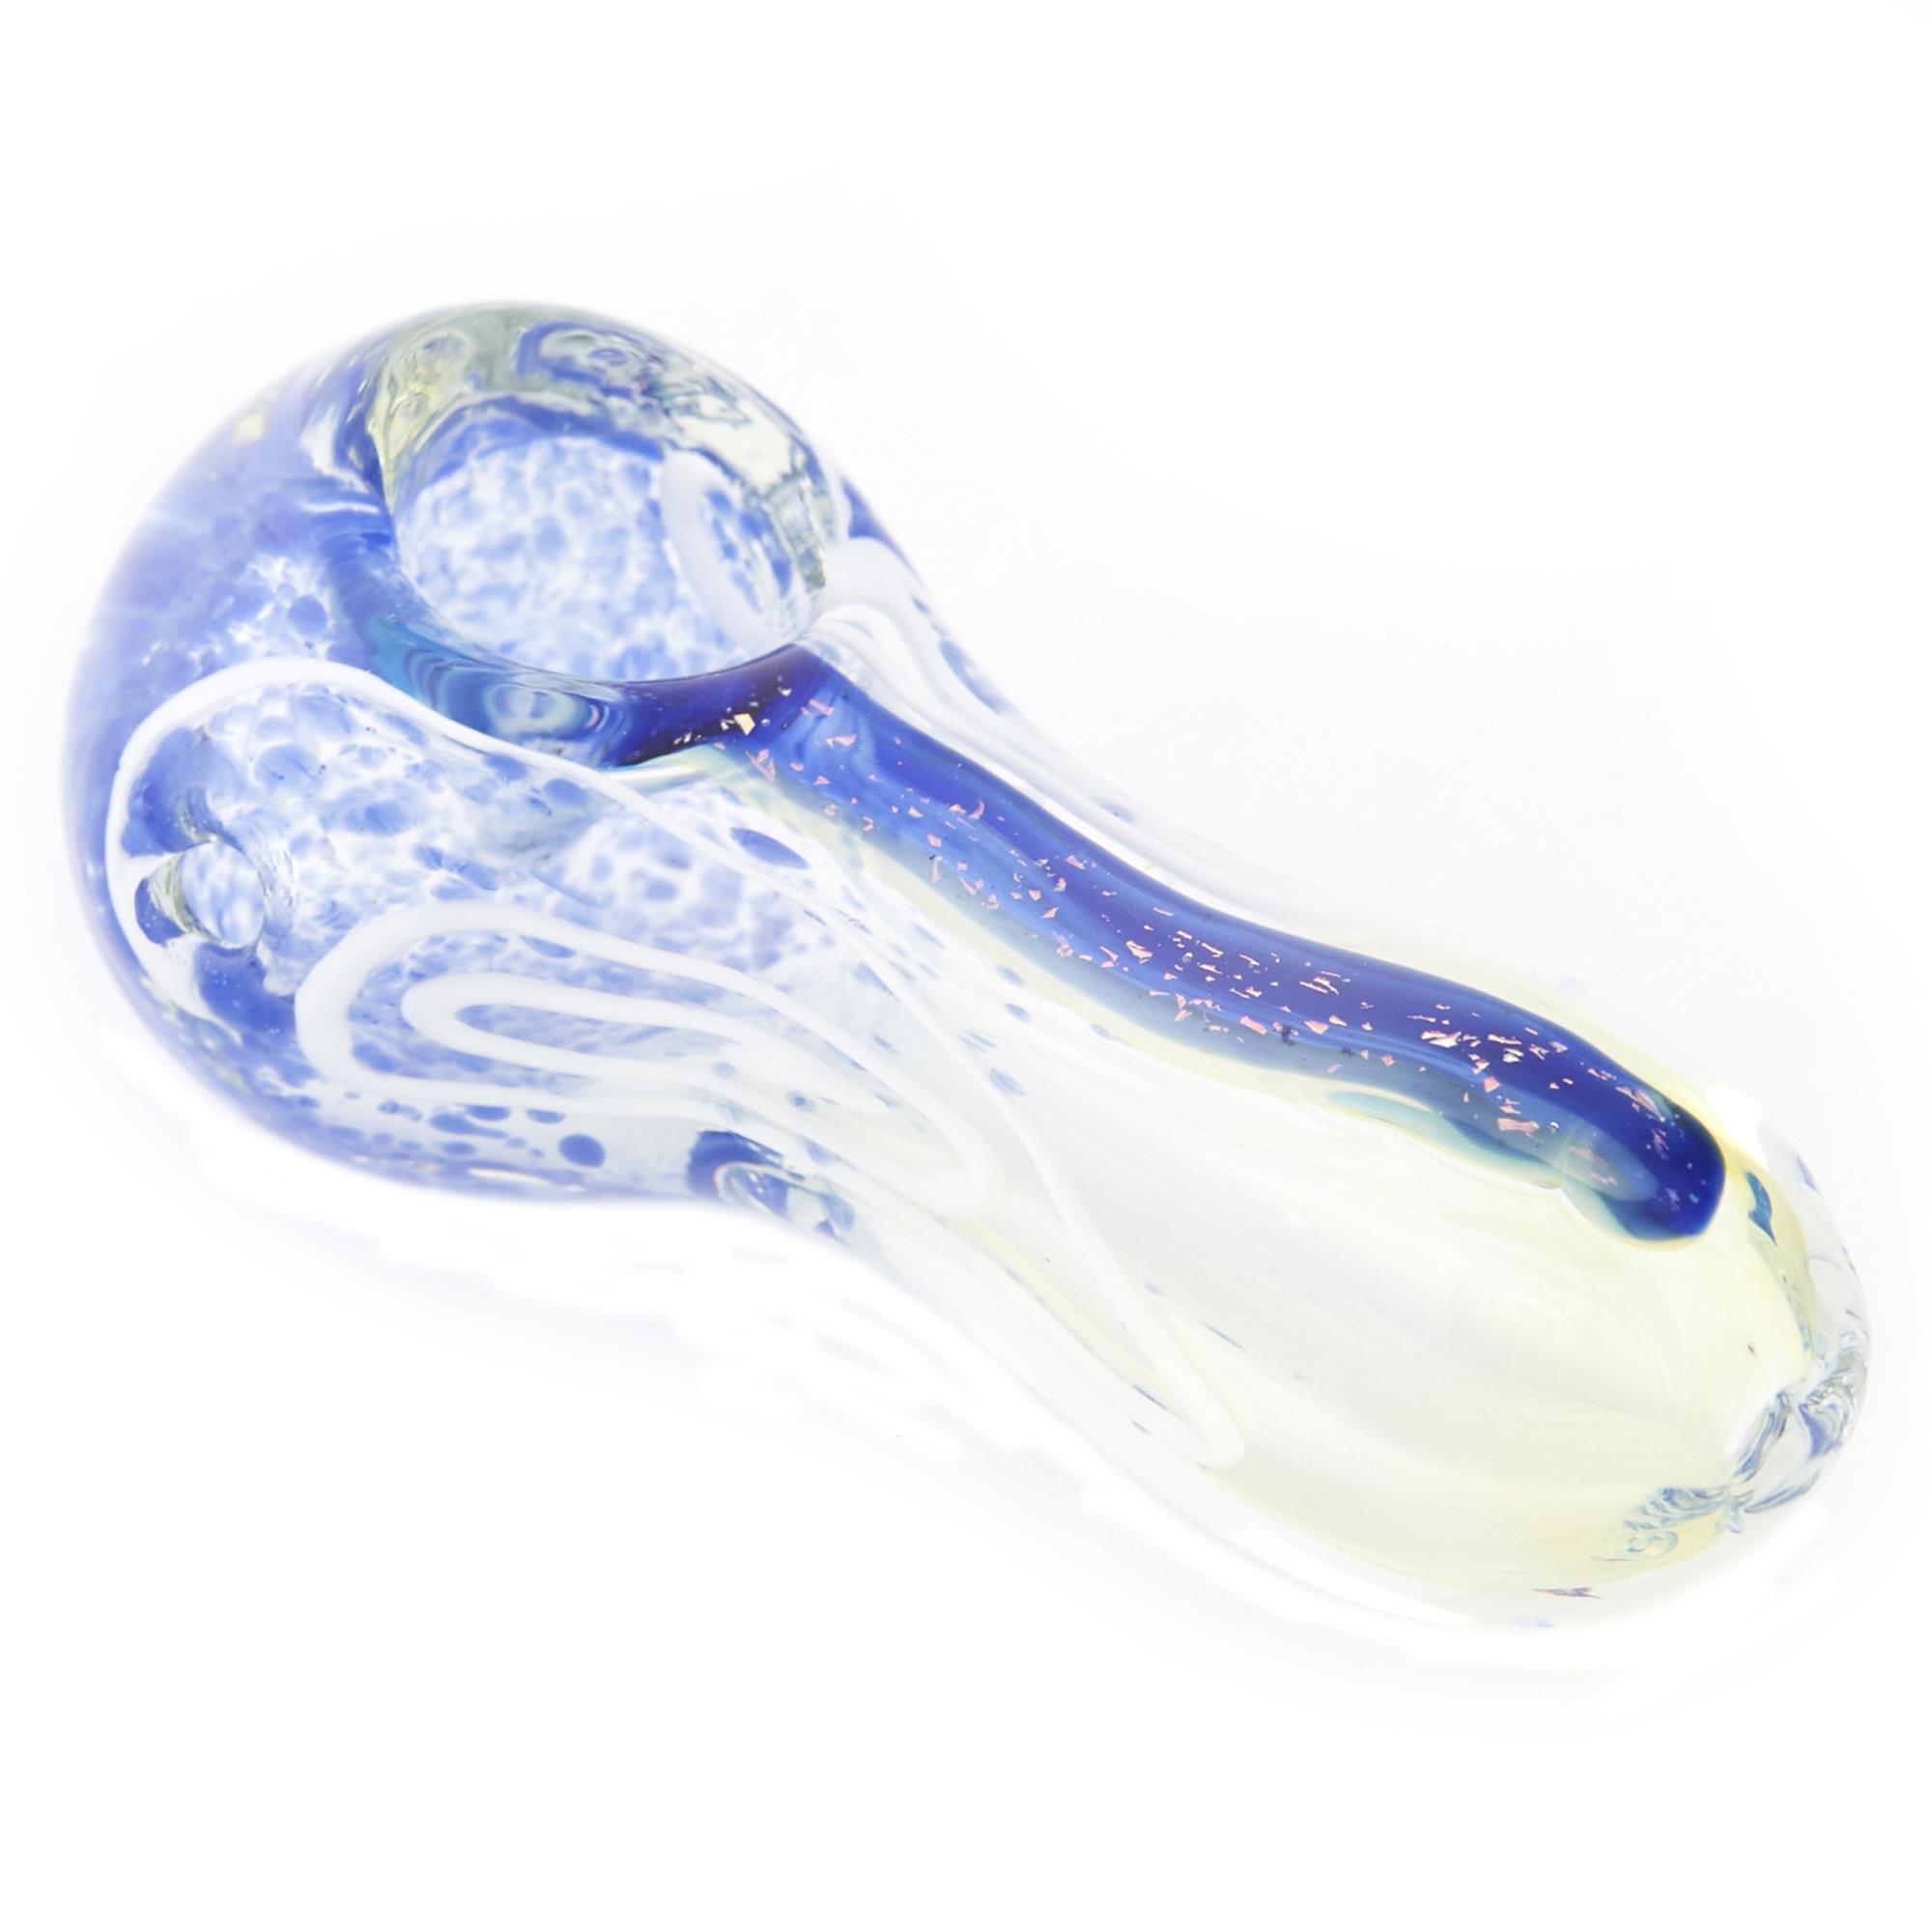 ICE ICE BABY SPOON PIPE